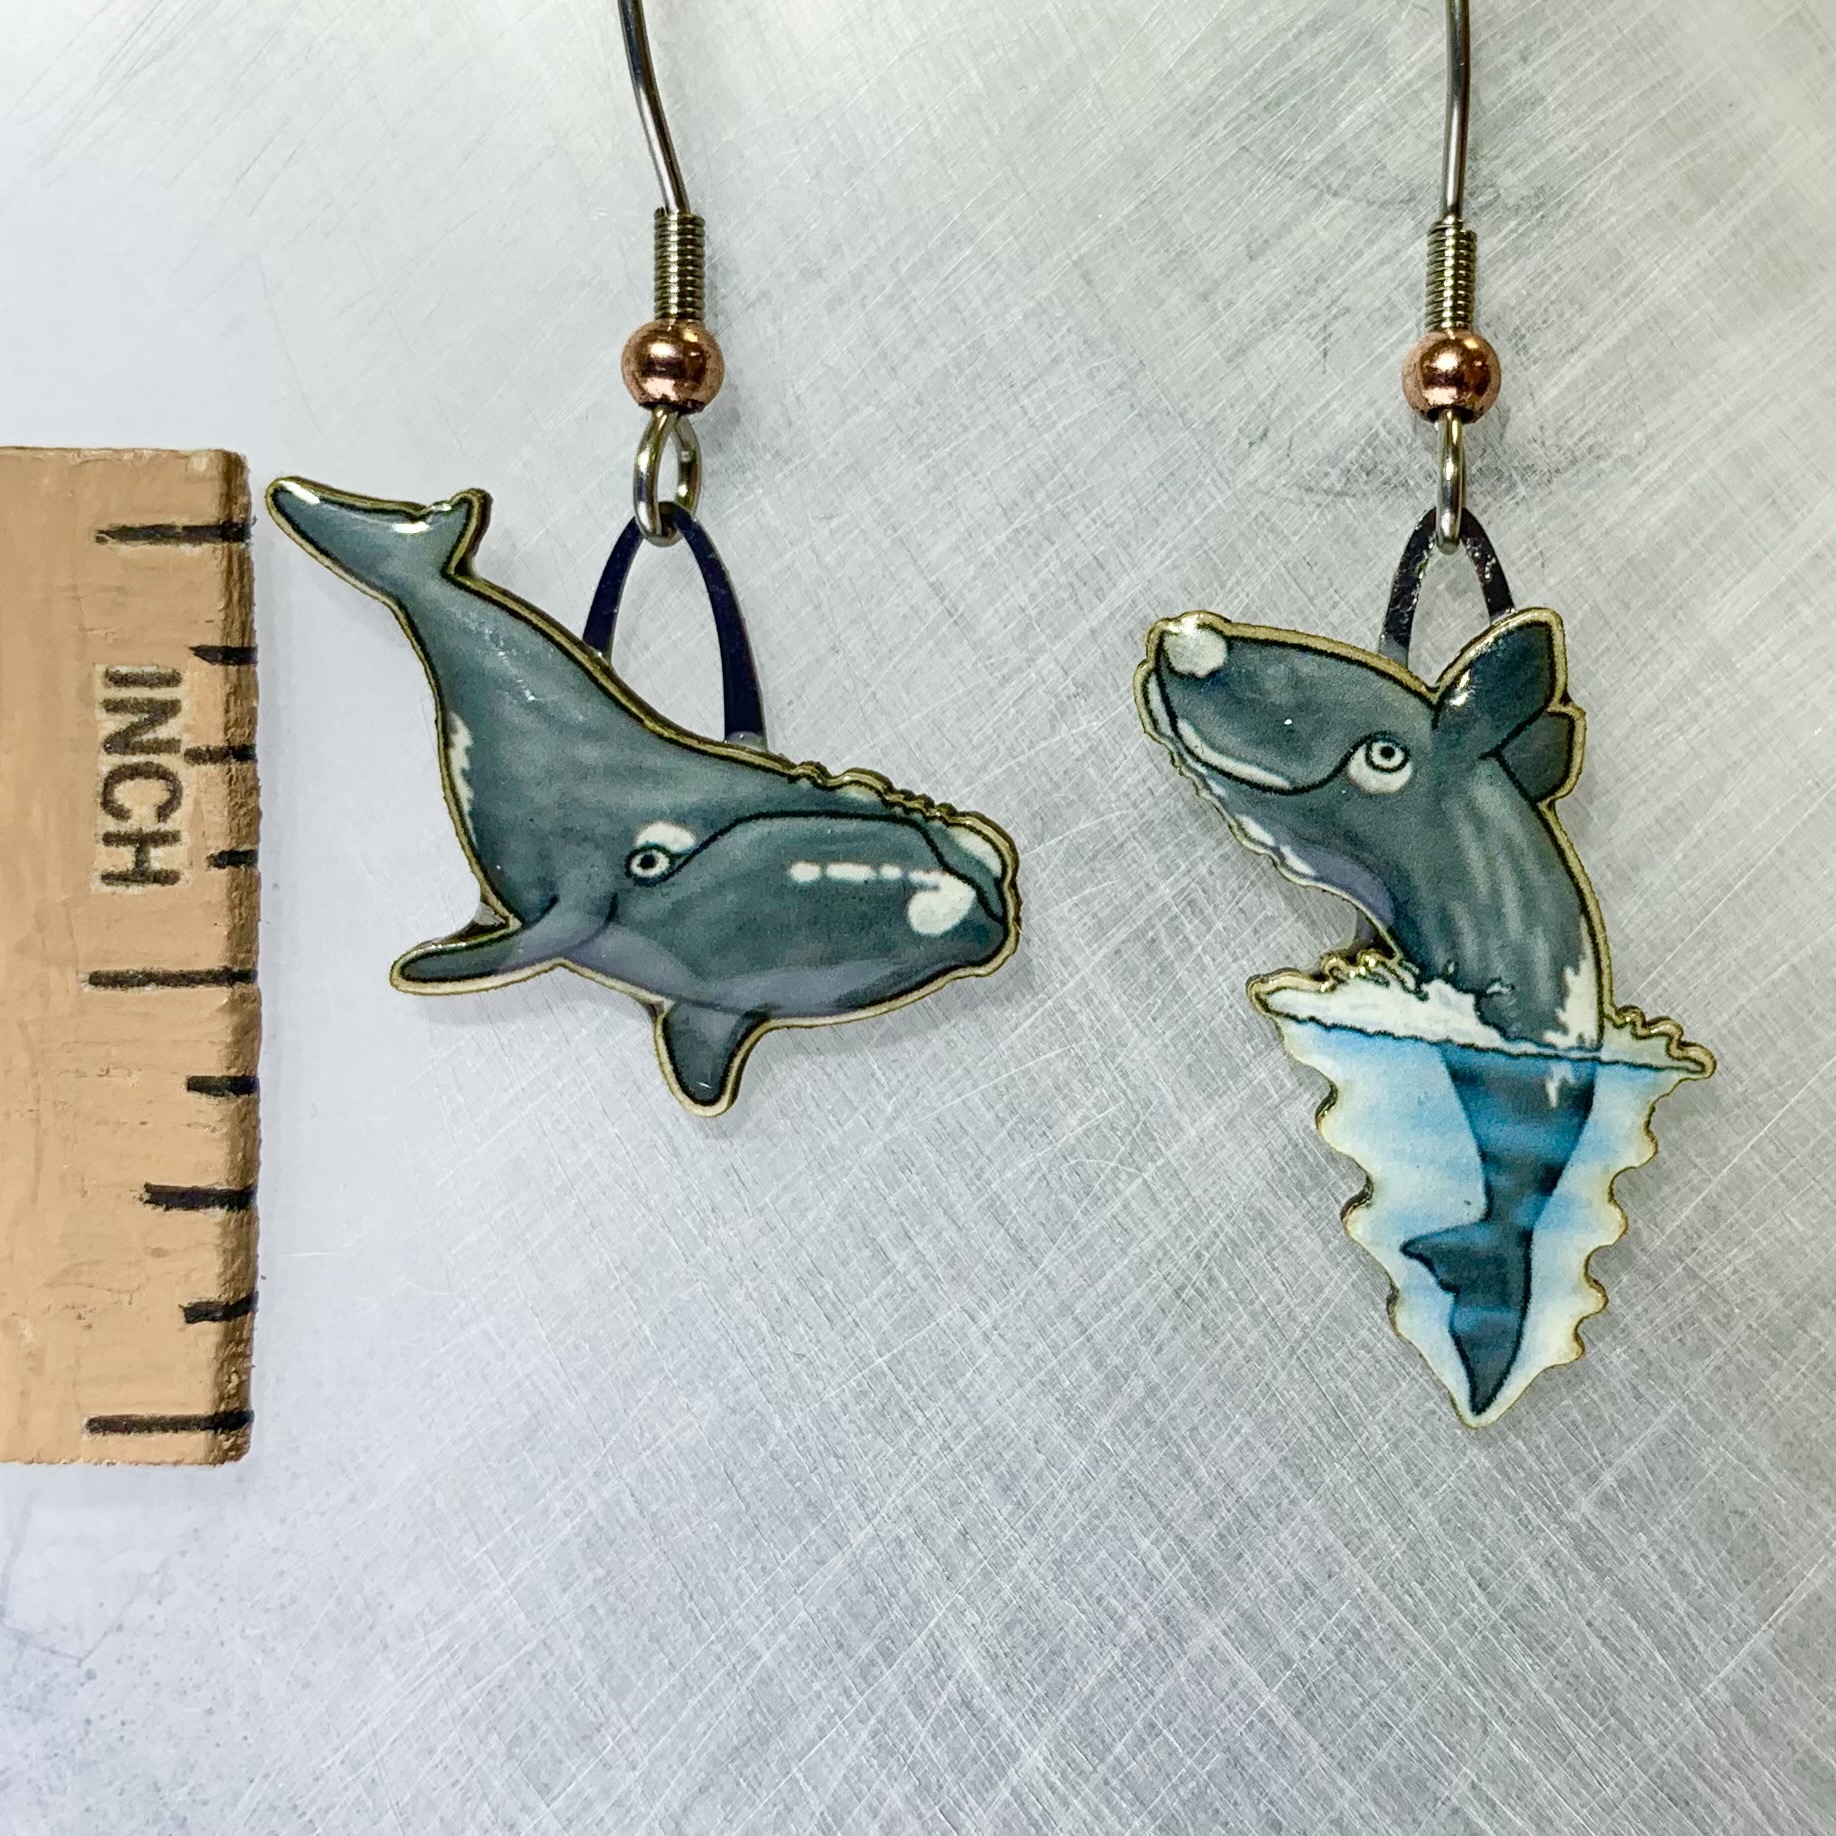 Picture shown is of 1 inch tall pair of earrings of the marine animal the Right Whale.